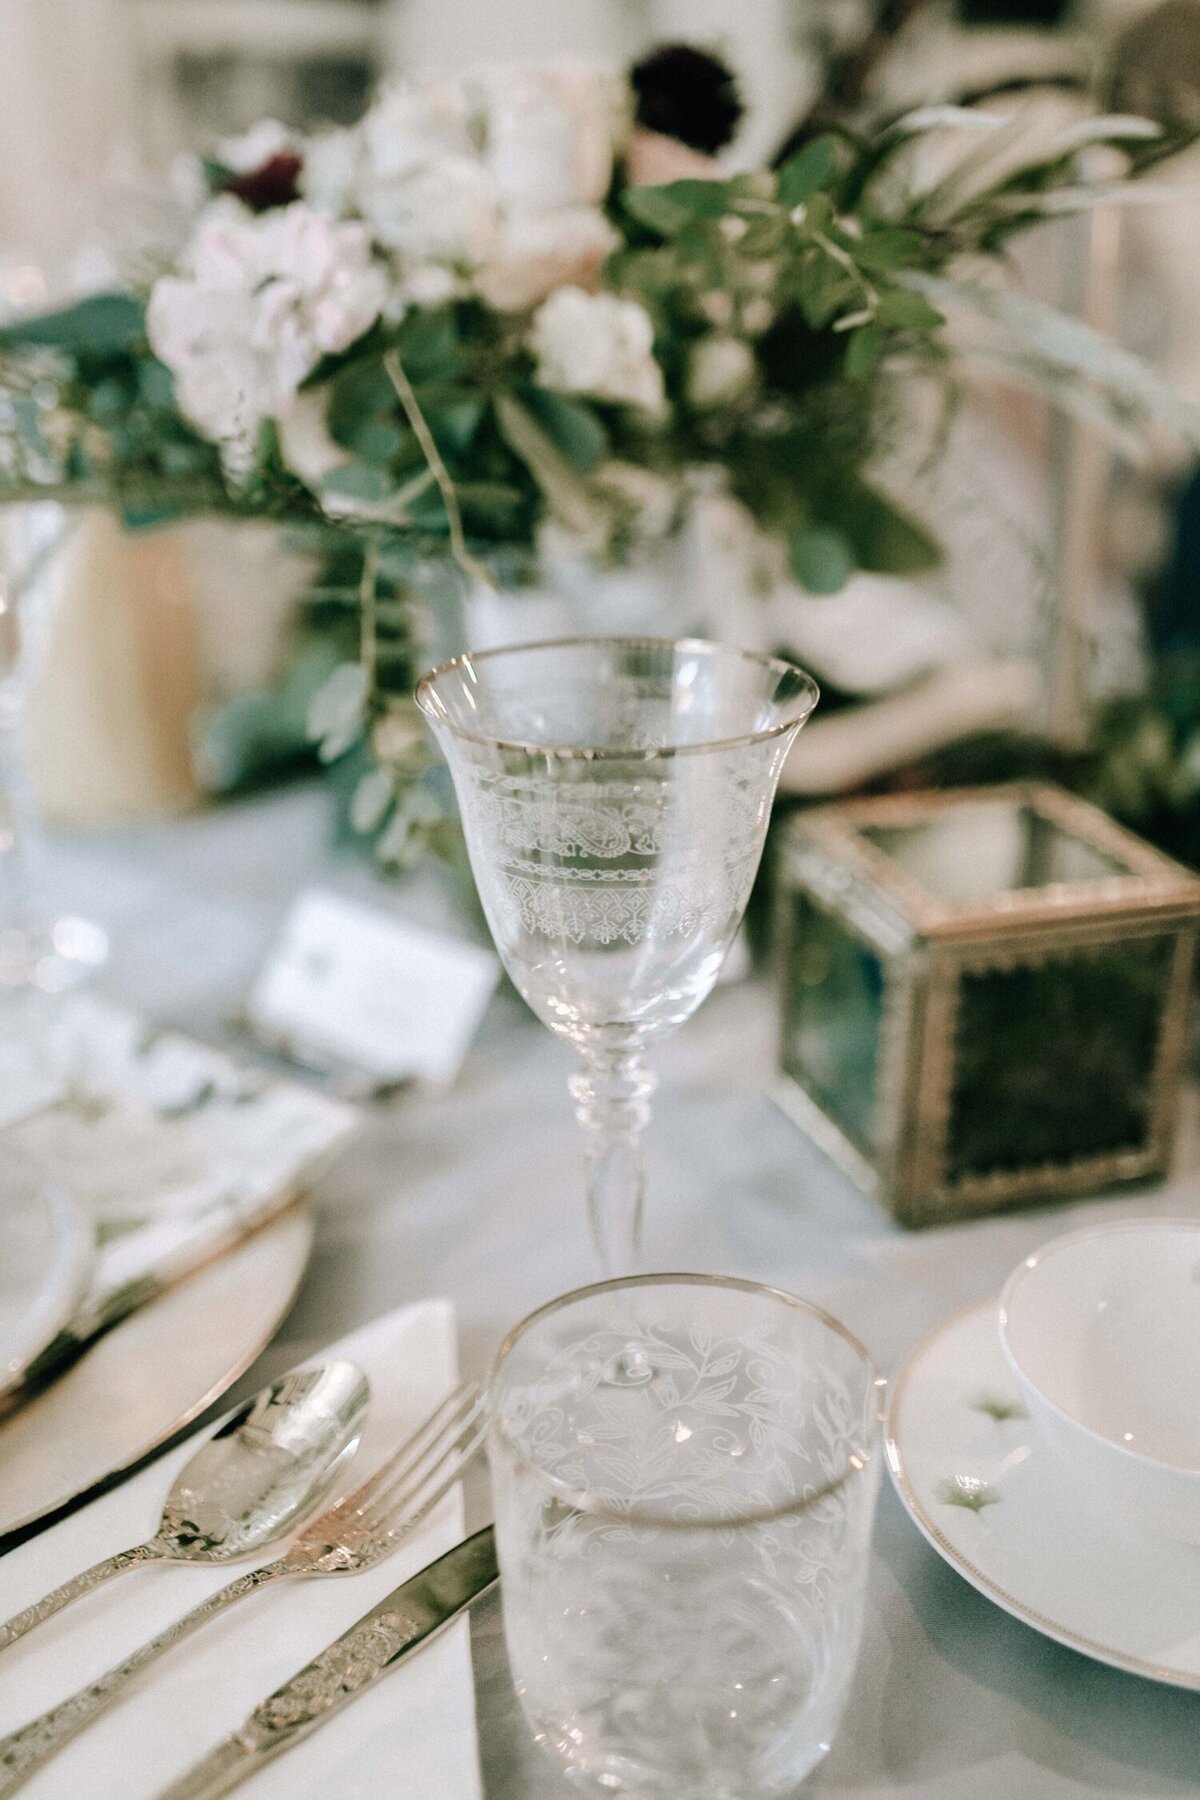 066_Flora_And_Grace_Europe_Fine_Art_Wedding_Photographer-157_A sophisticated fine art wedding in Europe with an editorial edge captured by Vogue wedding photographer Flora and Grace.